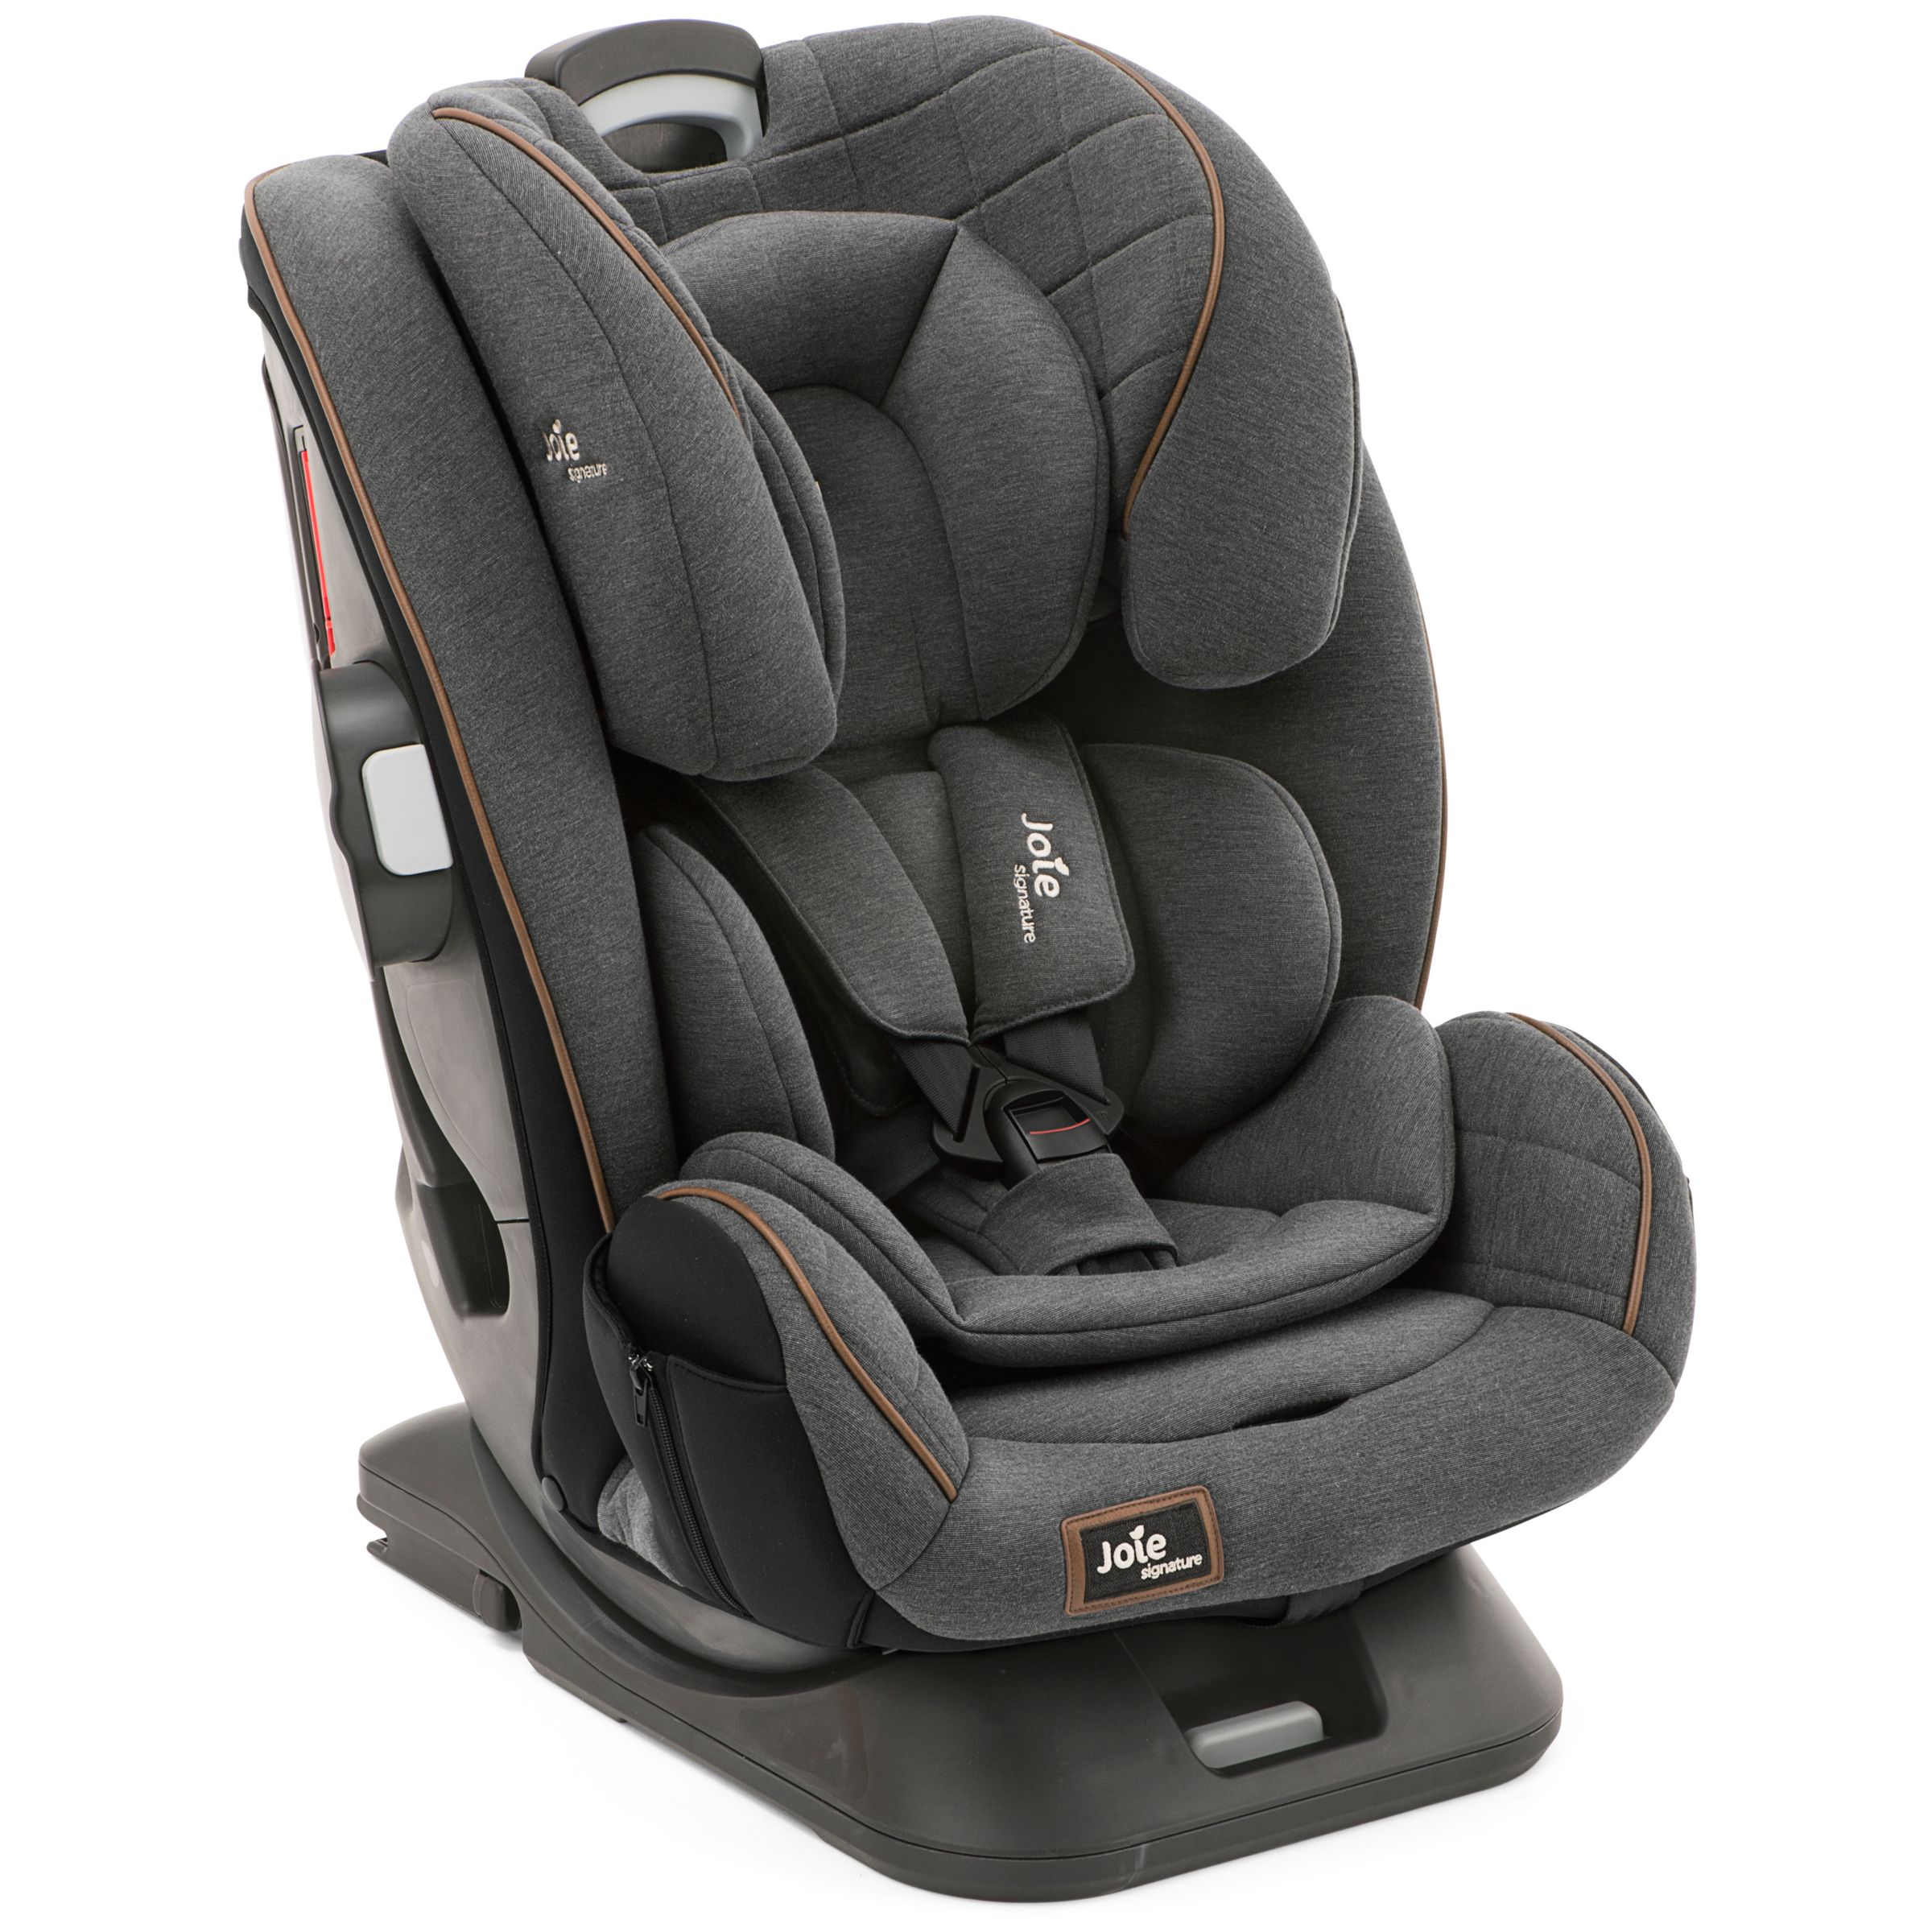 Joie Baby Every Stage FX Signature Group 0+/1/2/3 Car Seat, Noir at